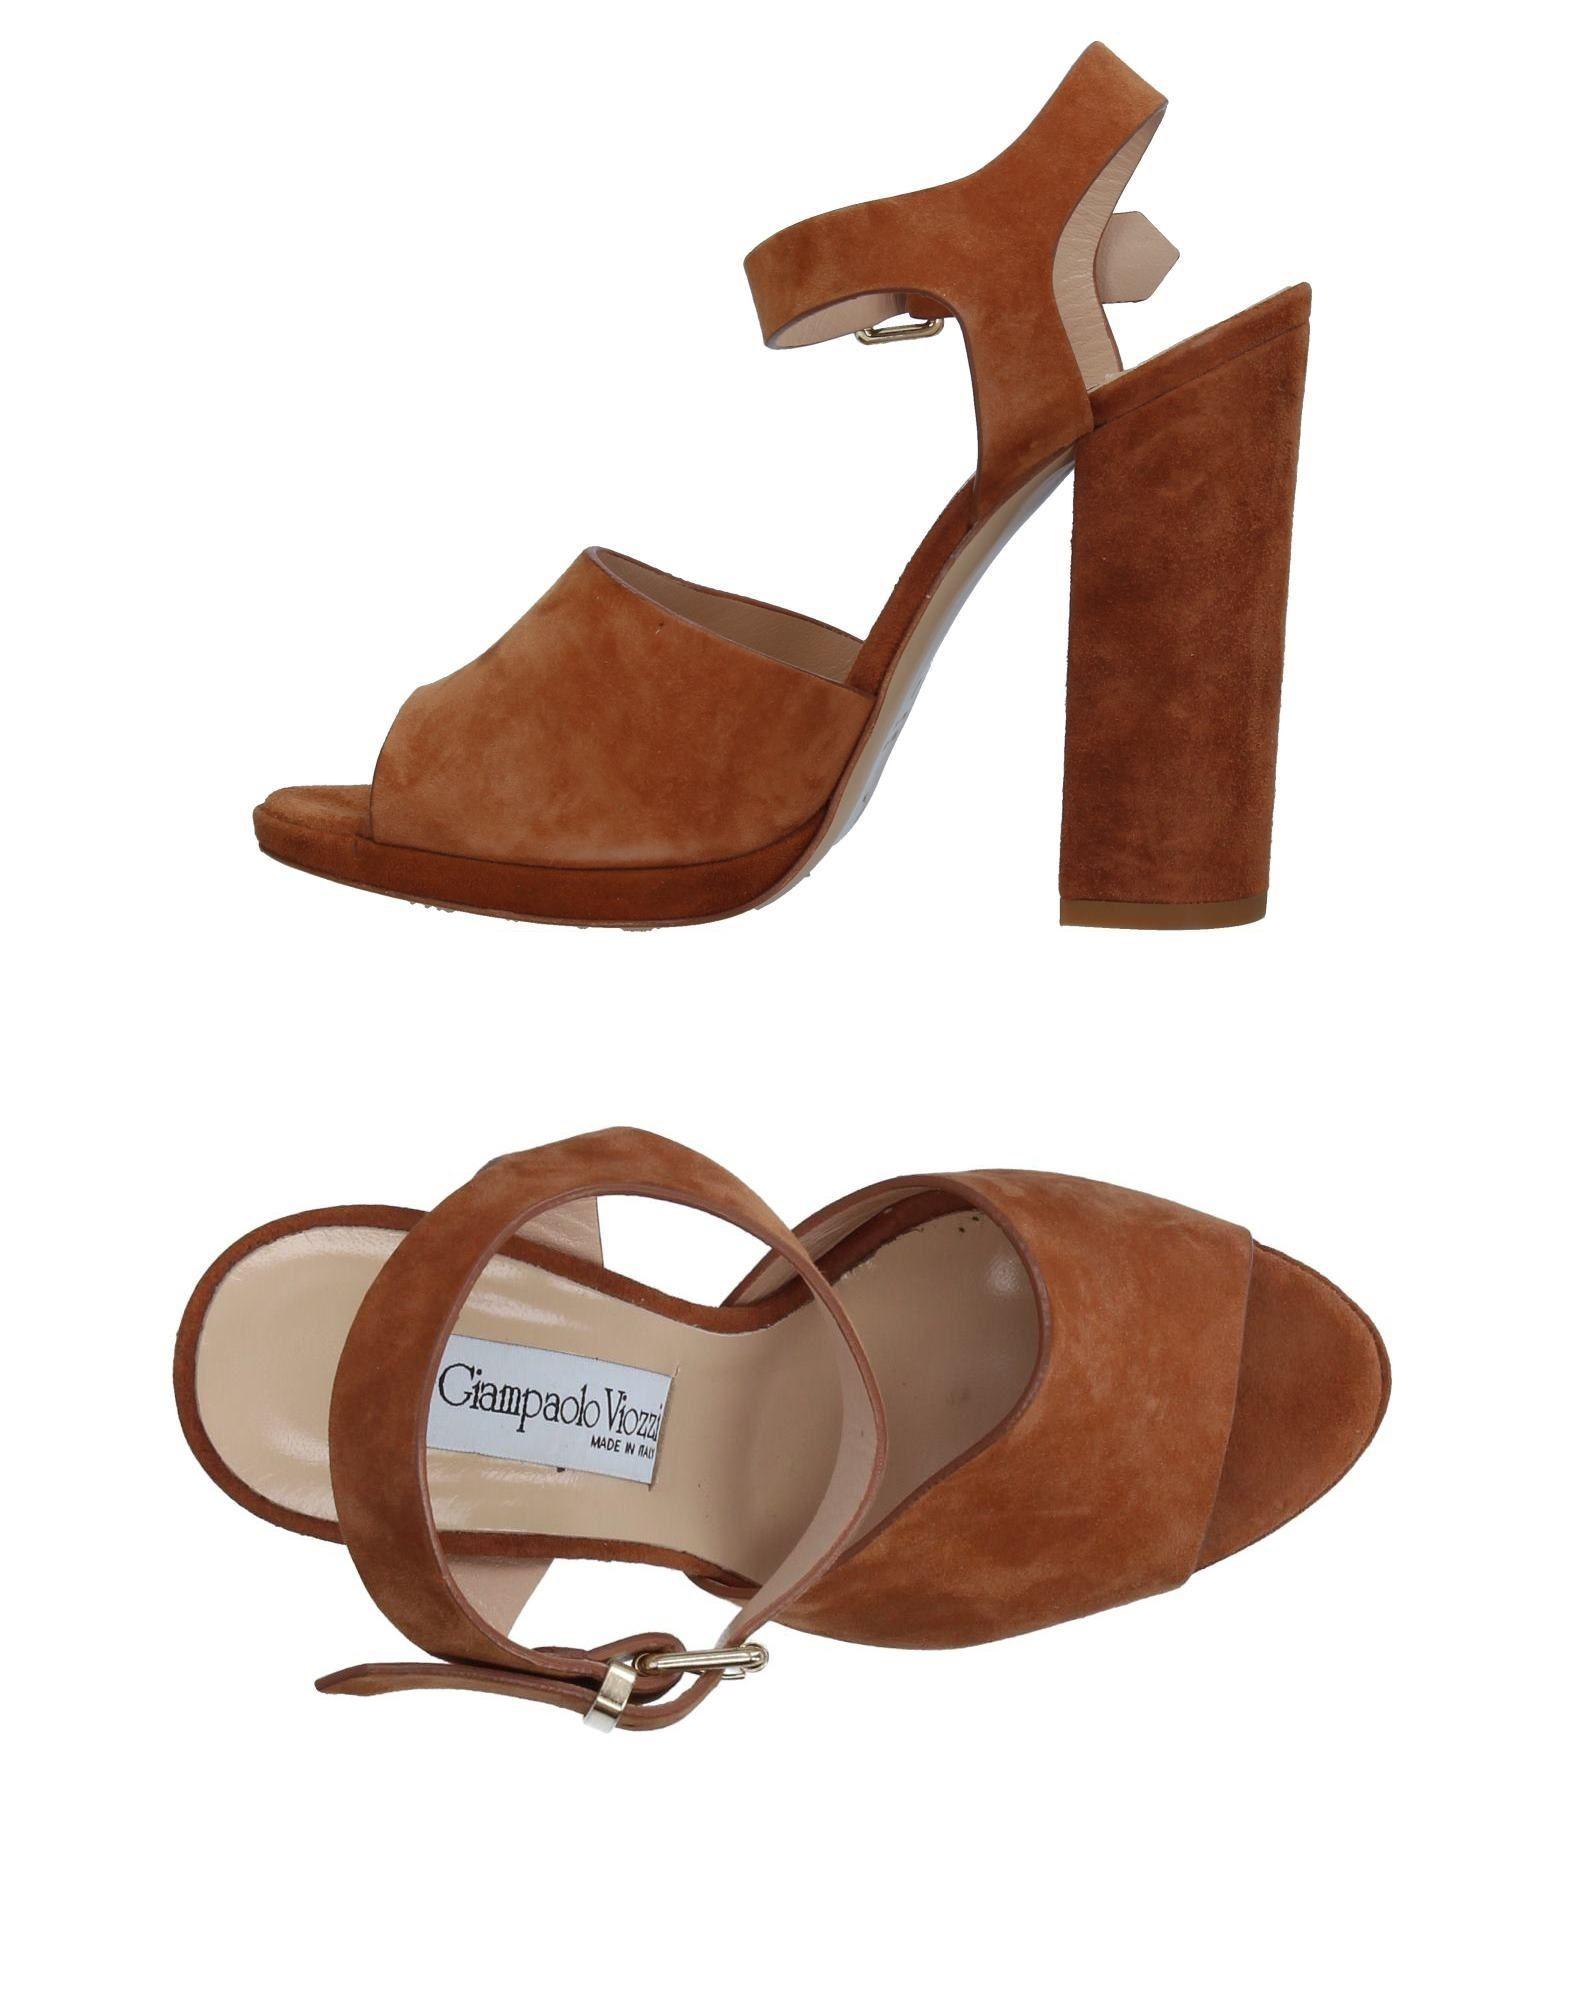 Giampaolo Viozzi Sandals in Camel (Brown) - Lyst